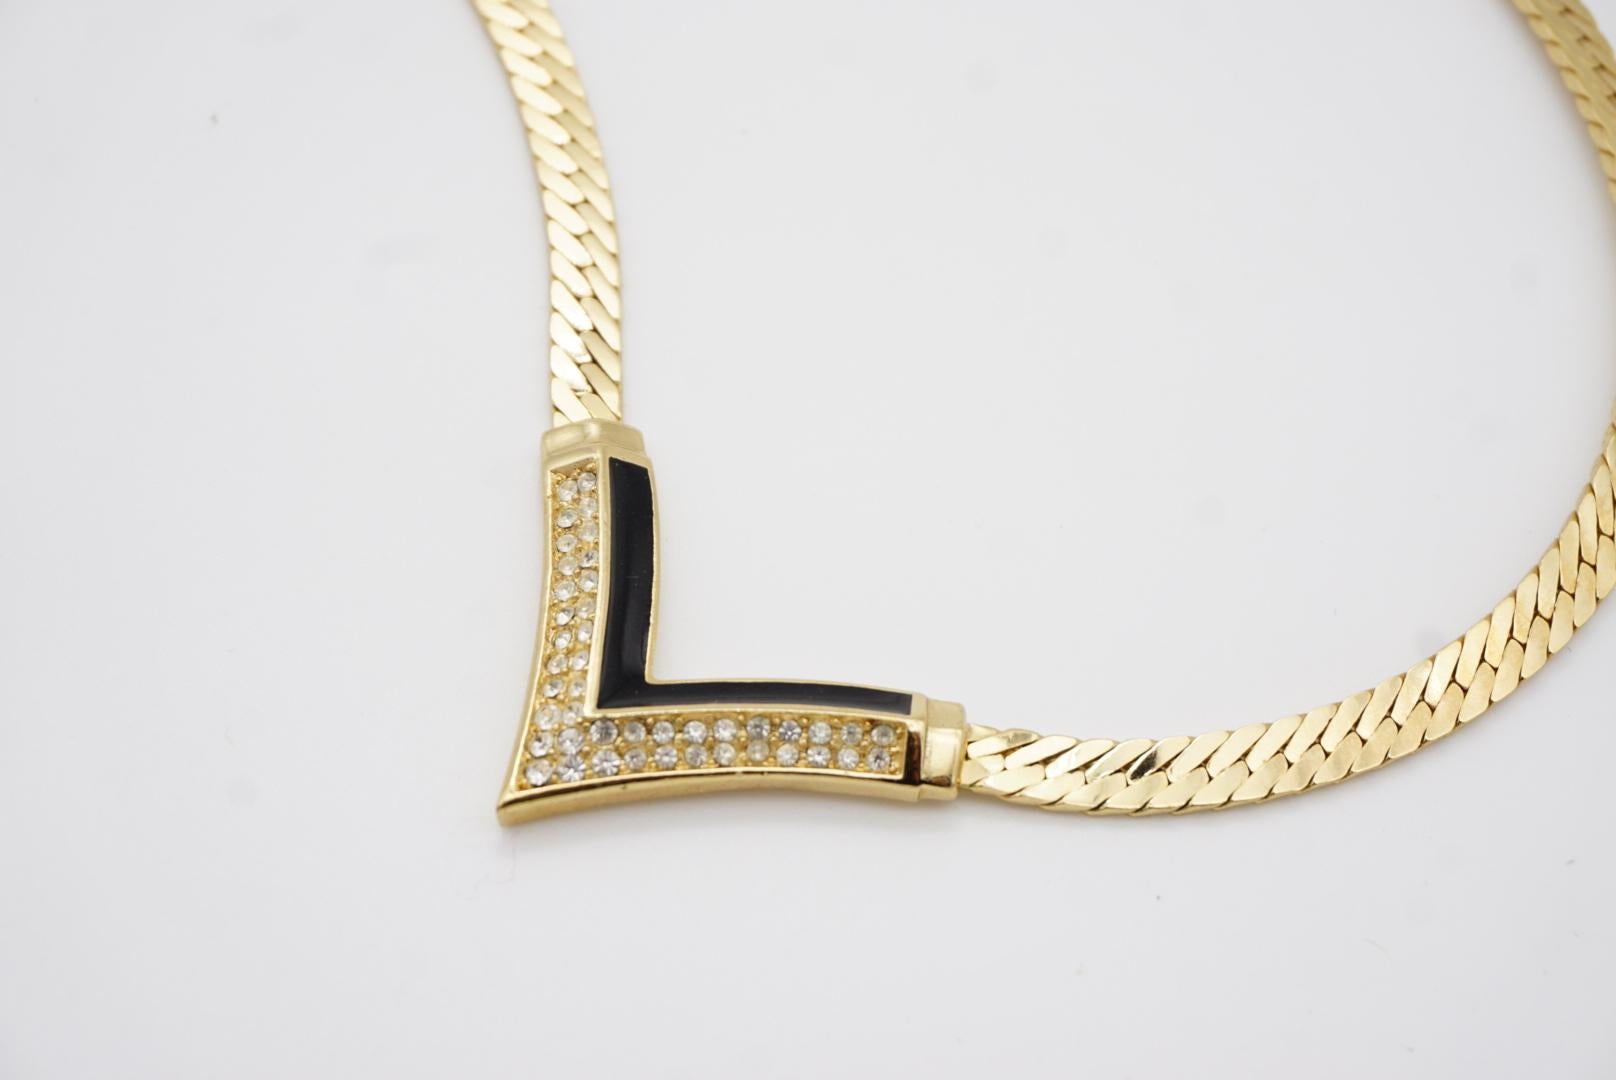 Christian Dior Vintage 1970s Black Crystal Arrow Triangle Pendant Gold Necklace For Sale 3